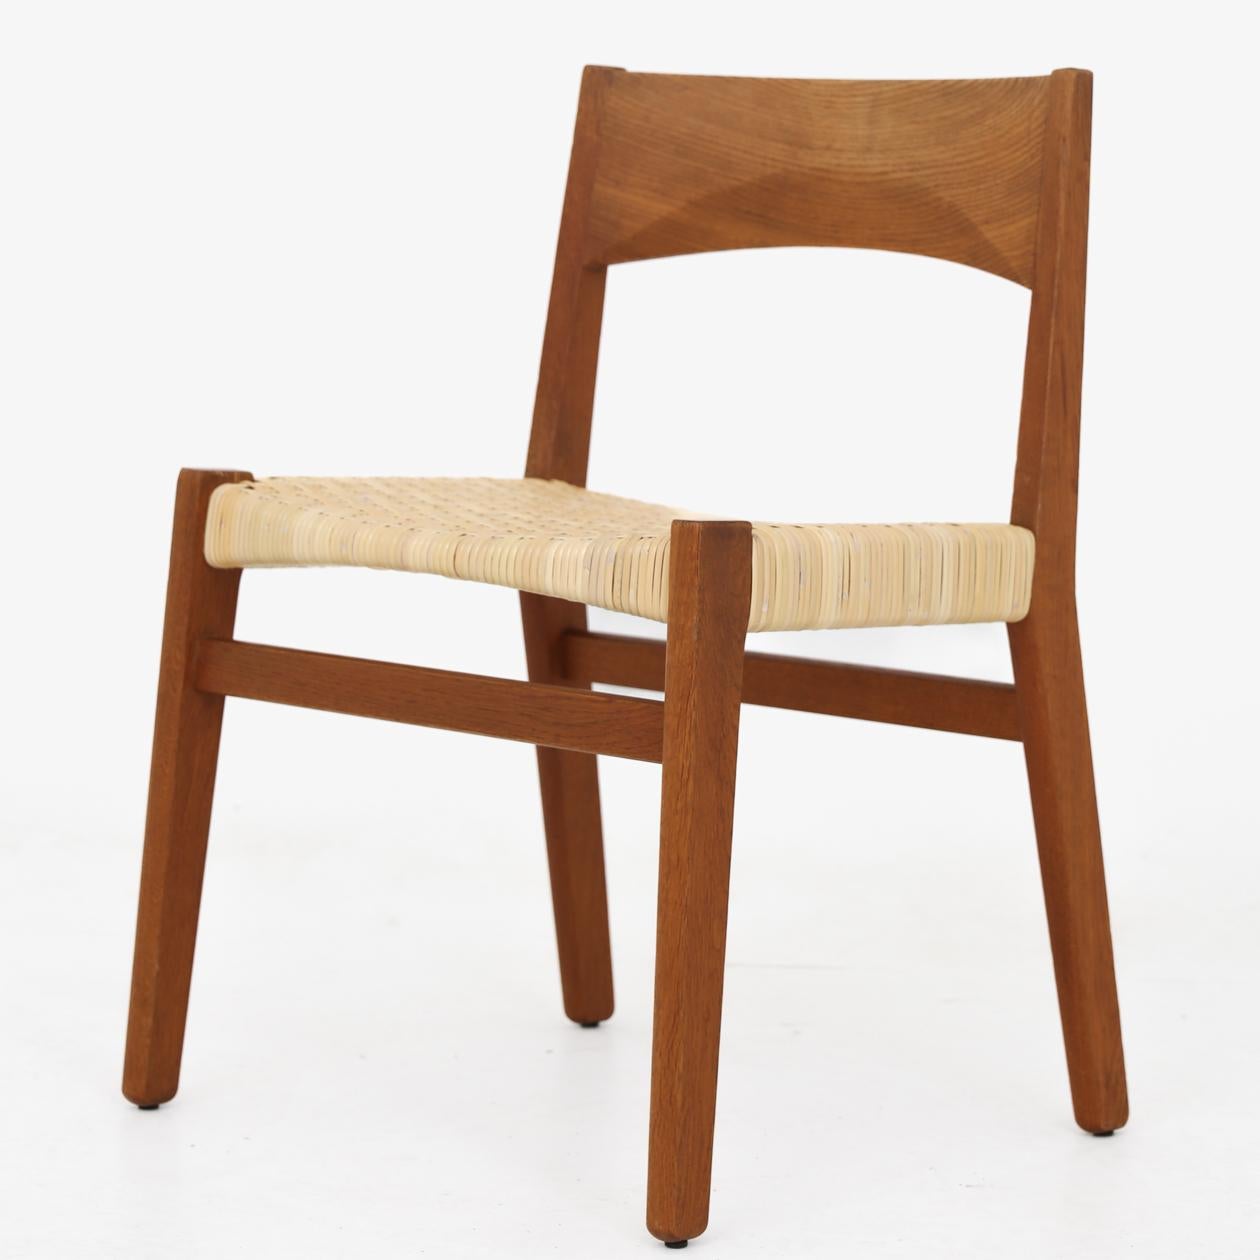 Set of 6 dining chairs in patinated oak and new cane. Presented at the Cabinetmakers' Guild Furniture Exhibition in 1962. Børge Mogensen / Erhard Rasmussen.